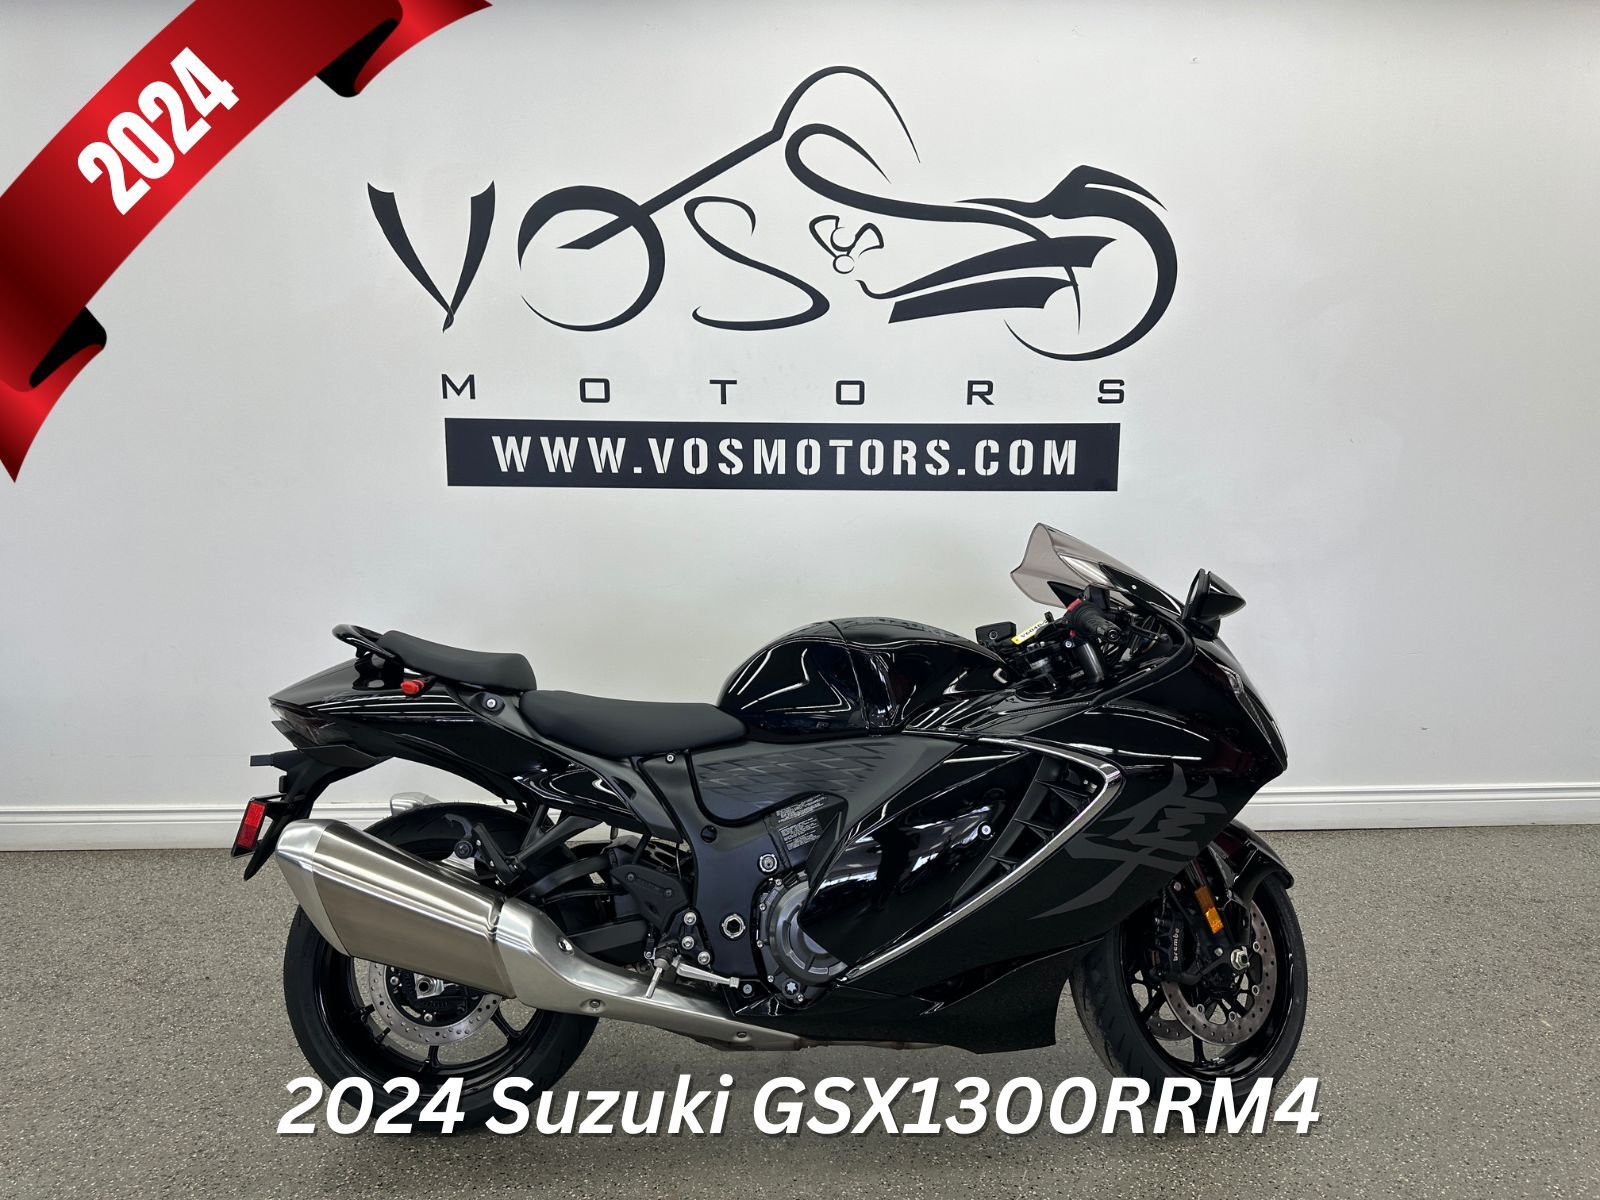 2024 Suzuki GSX1300RRM4 GSX1300RRM4 - V6040NP - -No Payments for 1 Year**